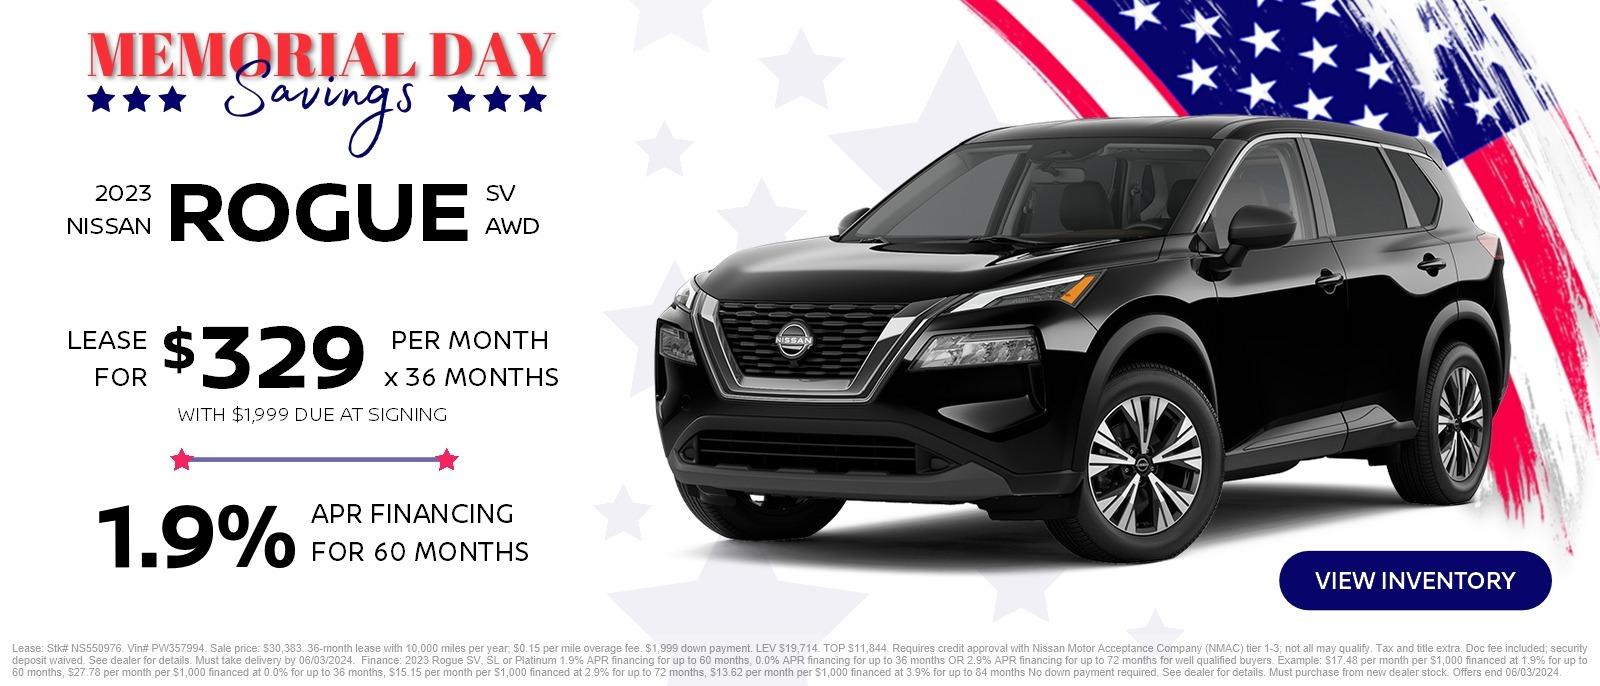 Memorial Day Savings
2023 Nissan Rogue SV AWD
Lease for $329 per month x 36 months with $1,999 due at signing
or
1.9% APR Financing for 60 months